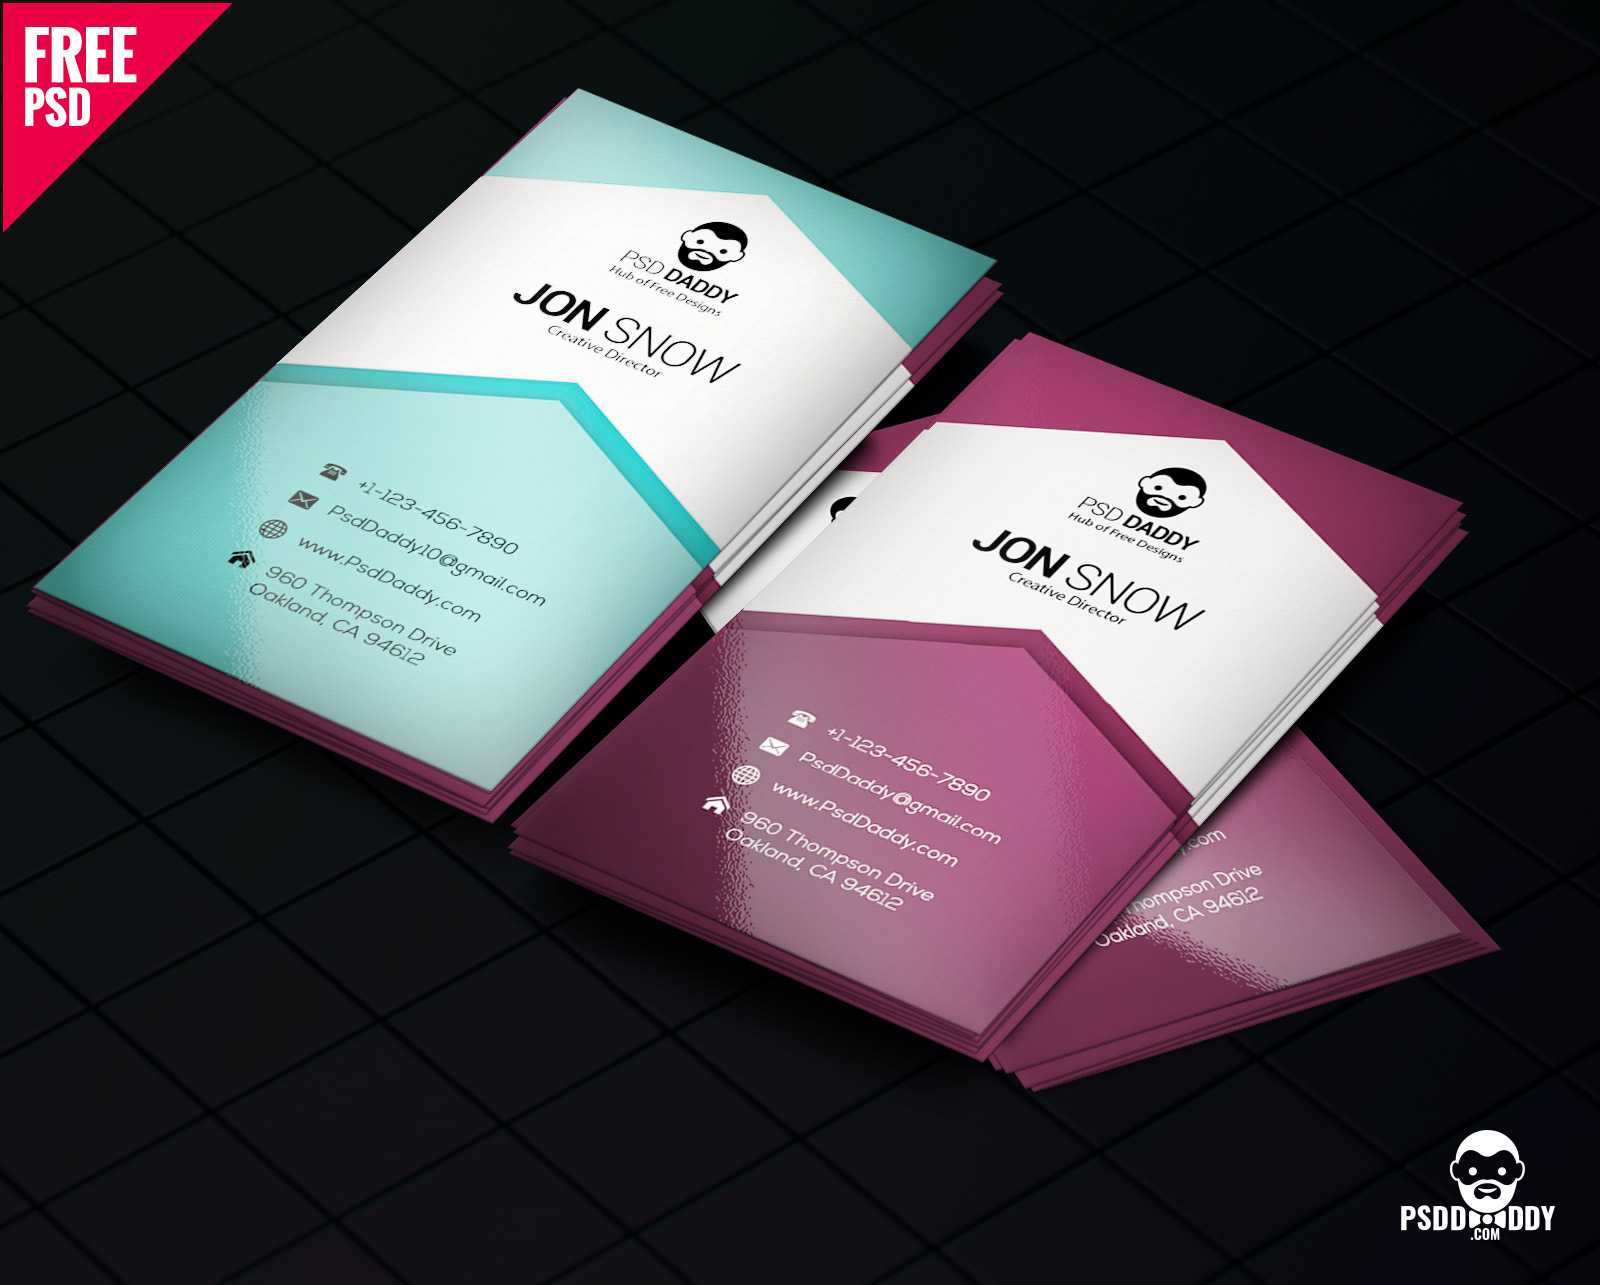 Download]Creative Business Card Psd Free | Psddaddy In Business Card Template Size Photoshop